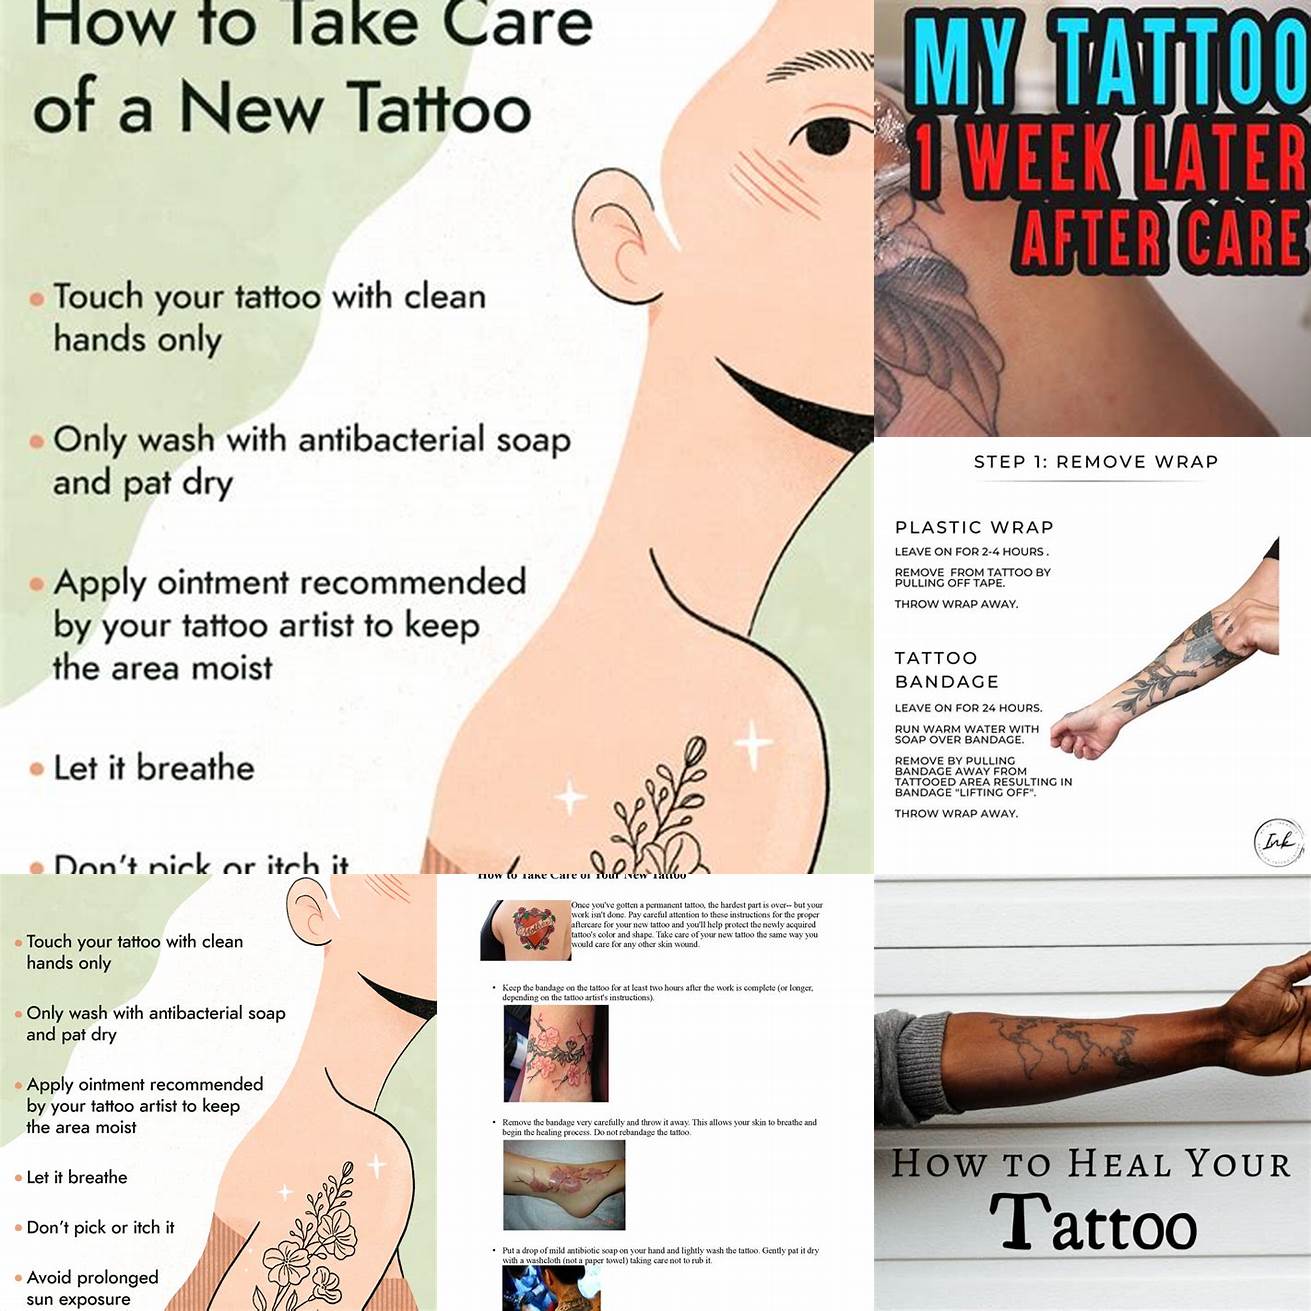 Take care of your tattoo after getting it